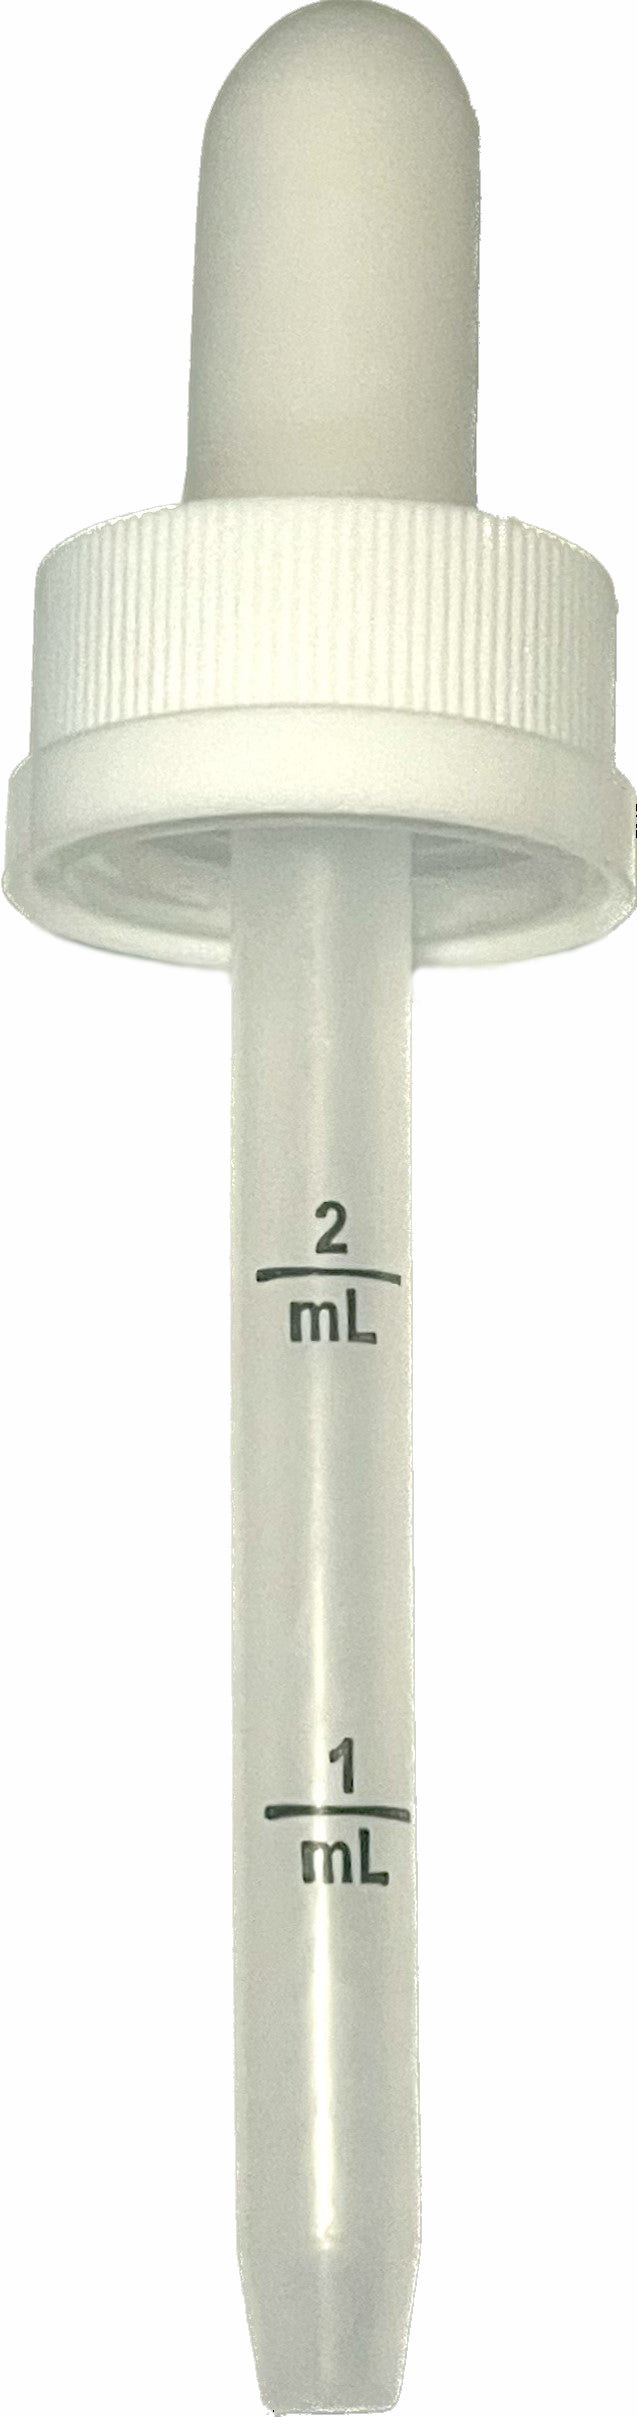 Dropper - Child Resistant (1.0 and 2.0 ml measurements) with Light Gray Bulb